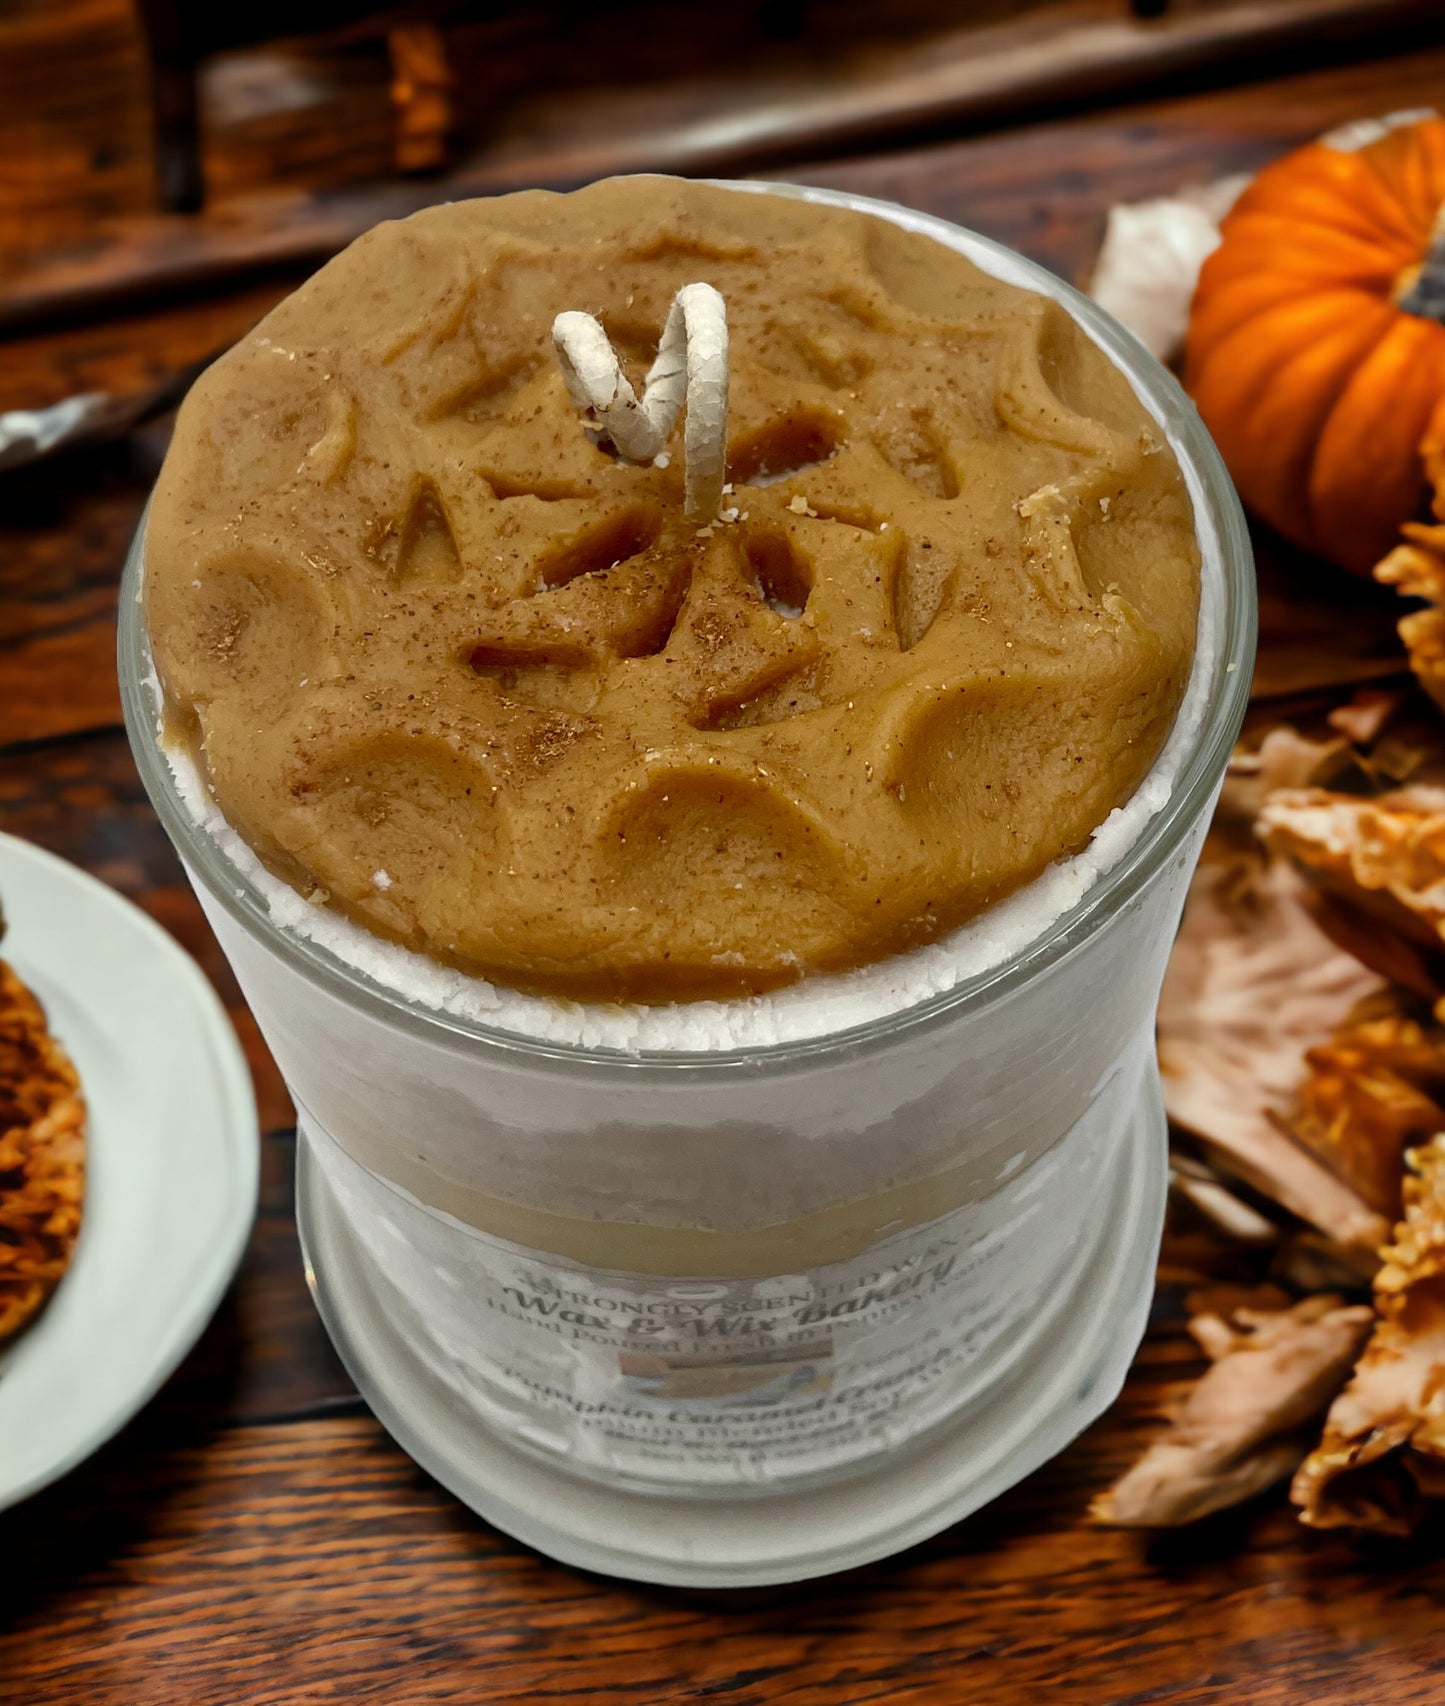 Pumpkin Caramel Crunch Pie Candle 11oz. Soy Candle/Strong Scented Candle/Pumpkin/Gift Box/Gift Bag/Holiday Candle/Winter Candle/Fall Candle.